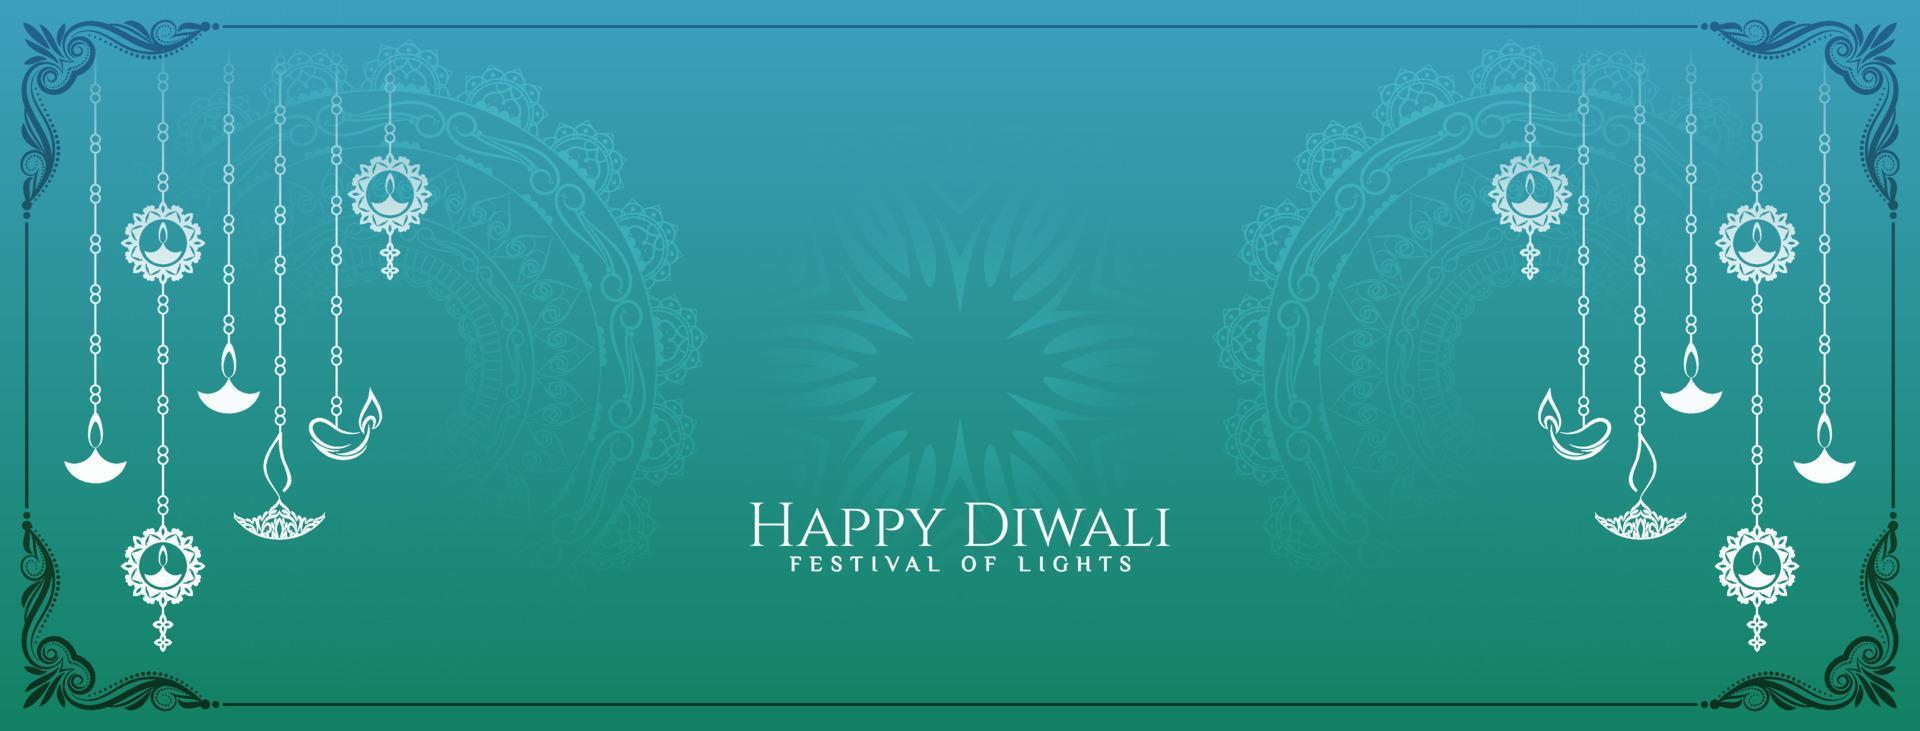 Happy Diwali Indian festival banner with decorative hanging lamps vector